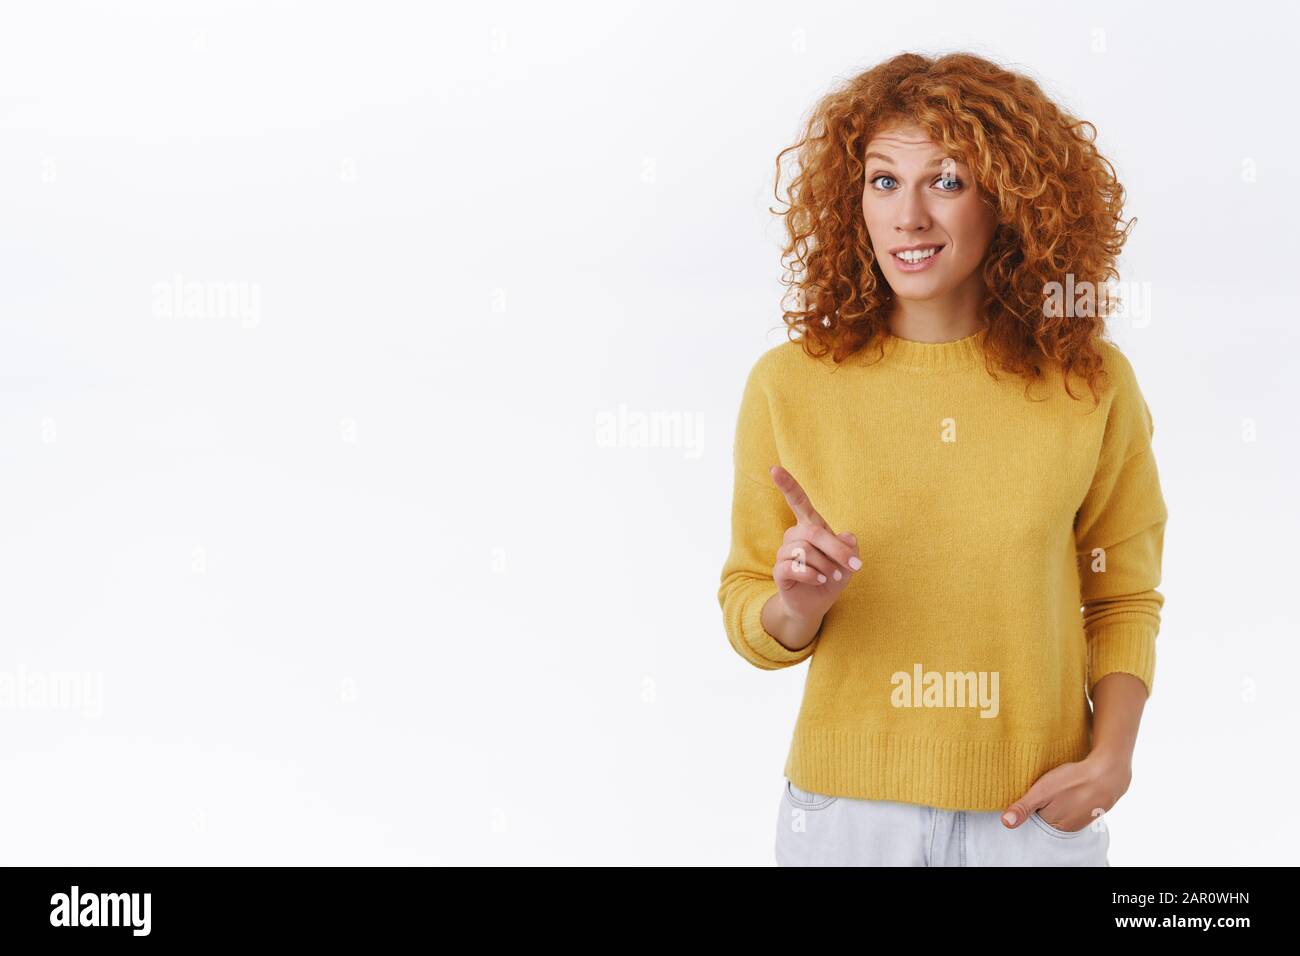 Unsure, redhead girl give advice, warn you something is not really good, shaking index finger and grimacing hesitant, have suggestion or worry, saying Stock Photo